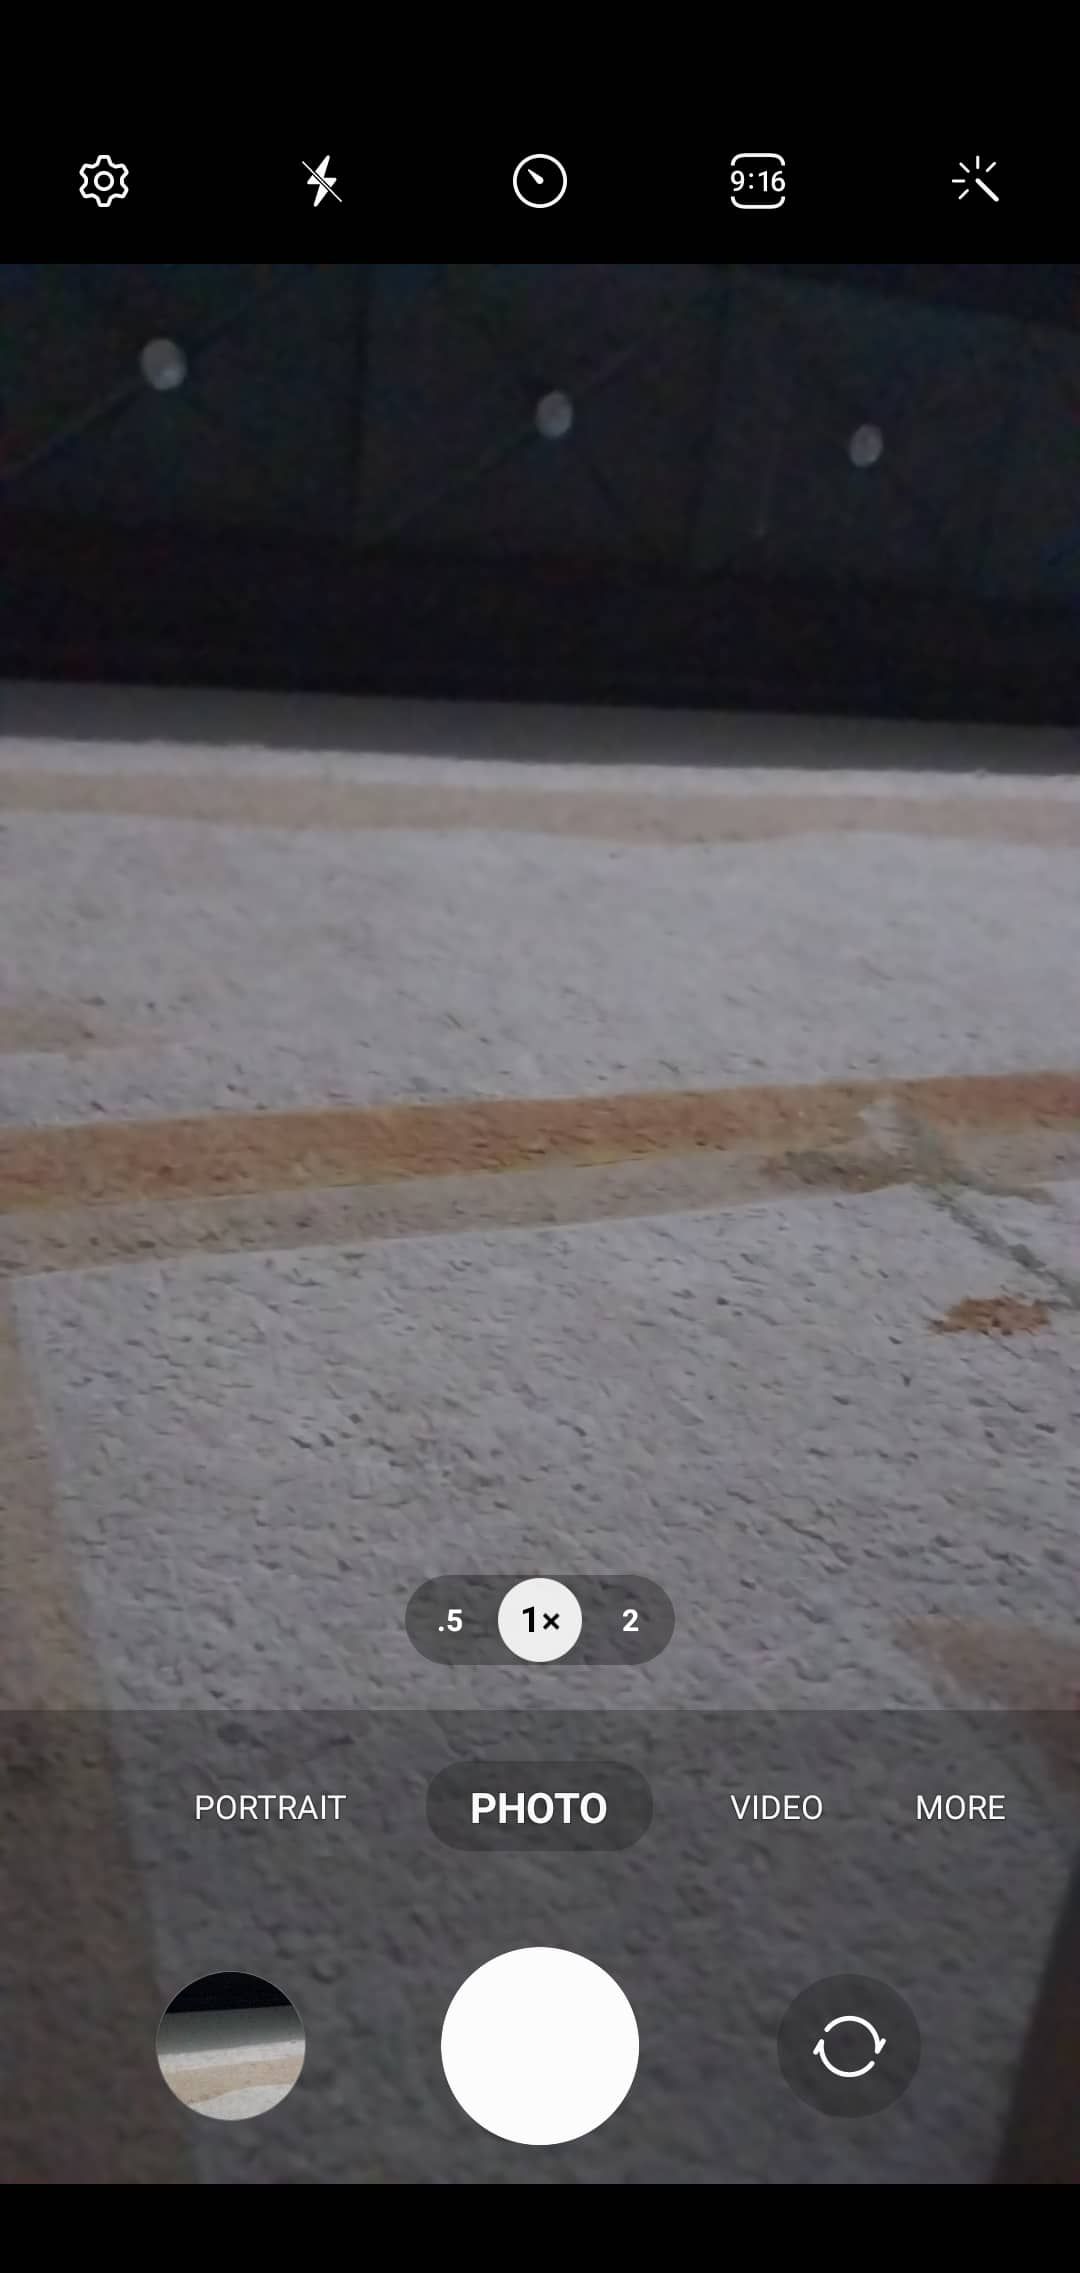 Normal camera view with 16:9 Aspect ratio on Android